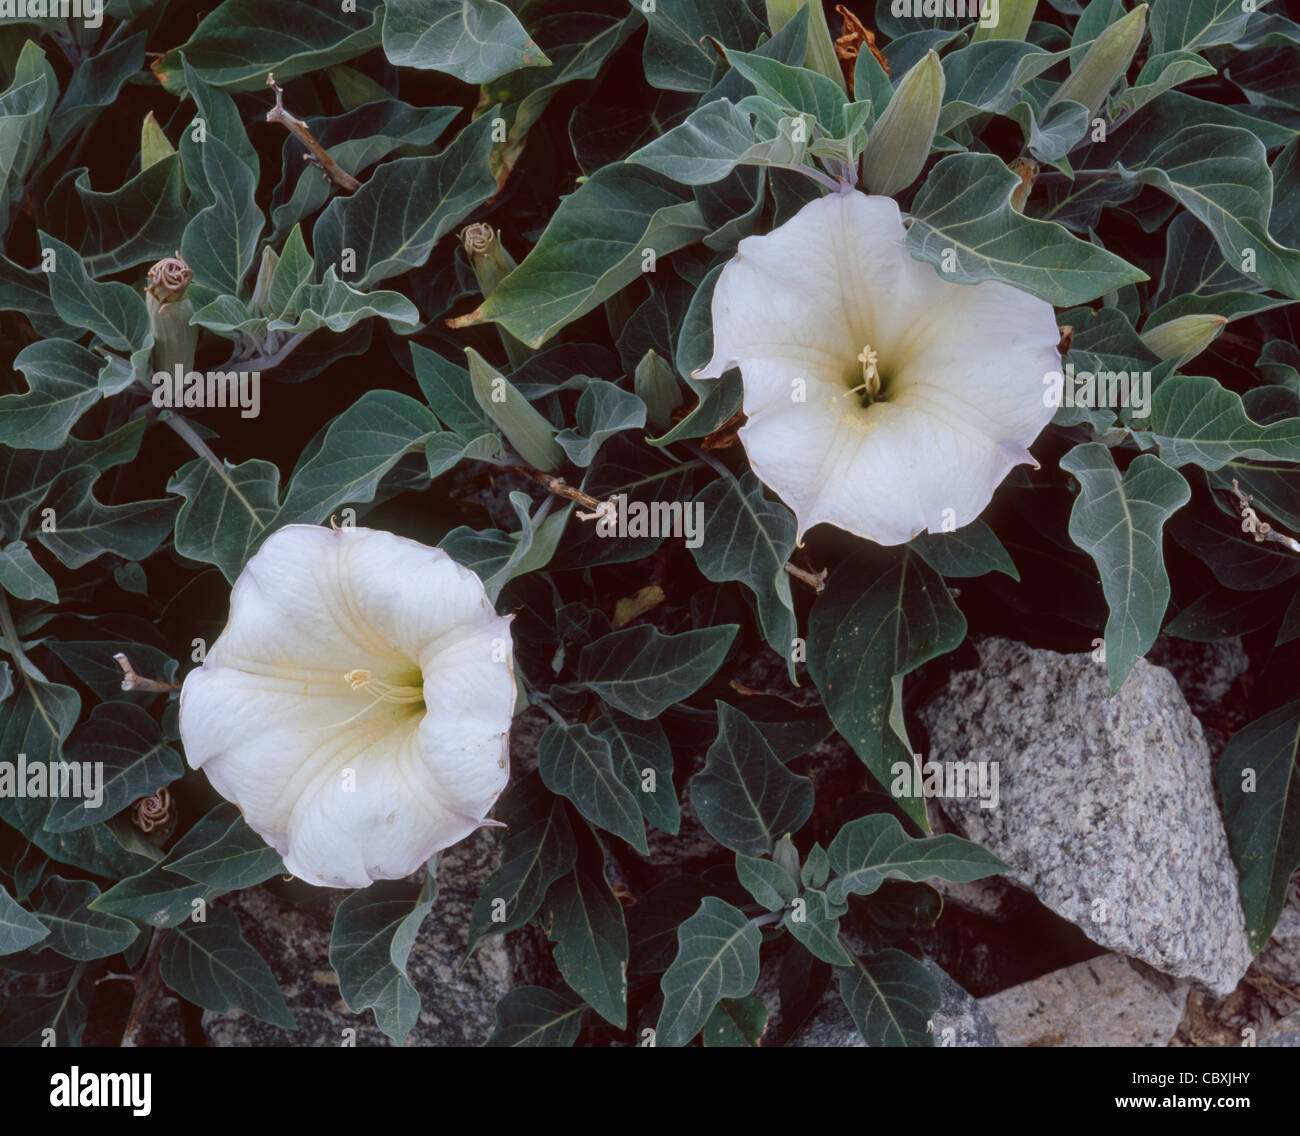 Sacred datura (Datura wrightii), a poisonous perennial, in bloom on alluvial fan, Joshua Tree National Park, California, USA Stock Photo